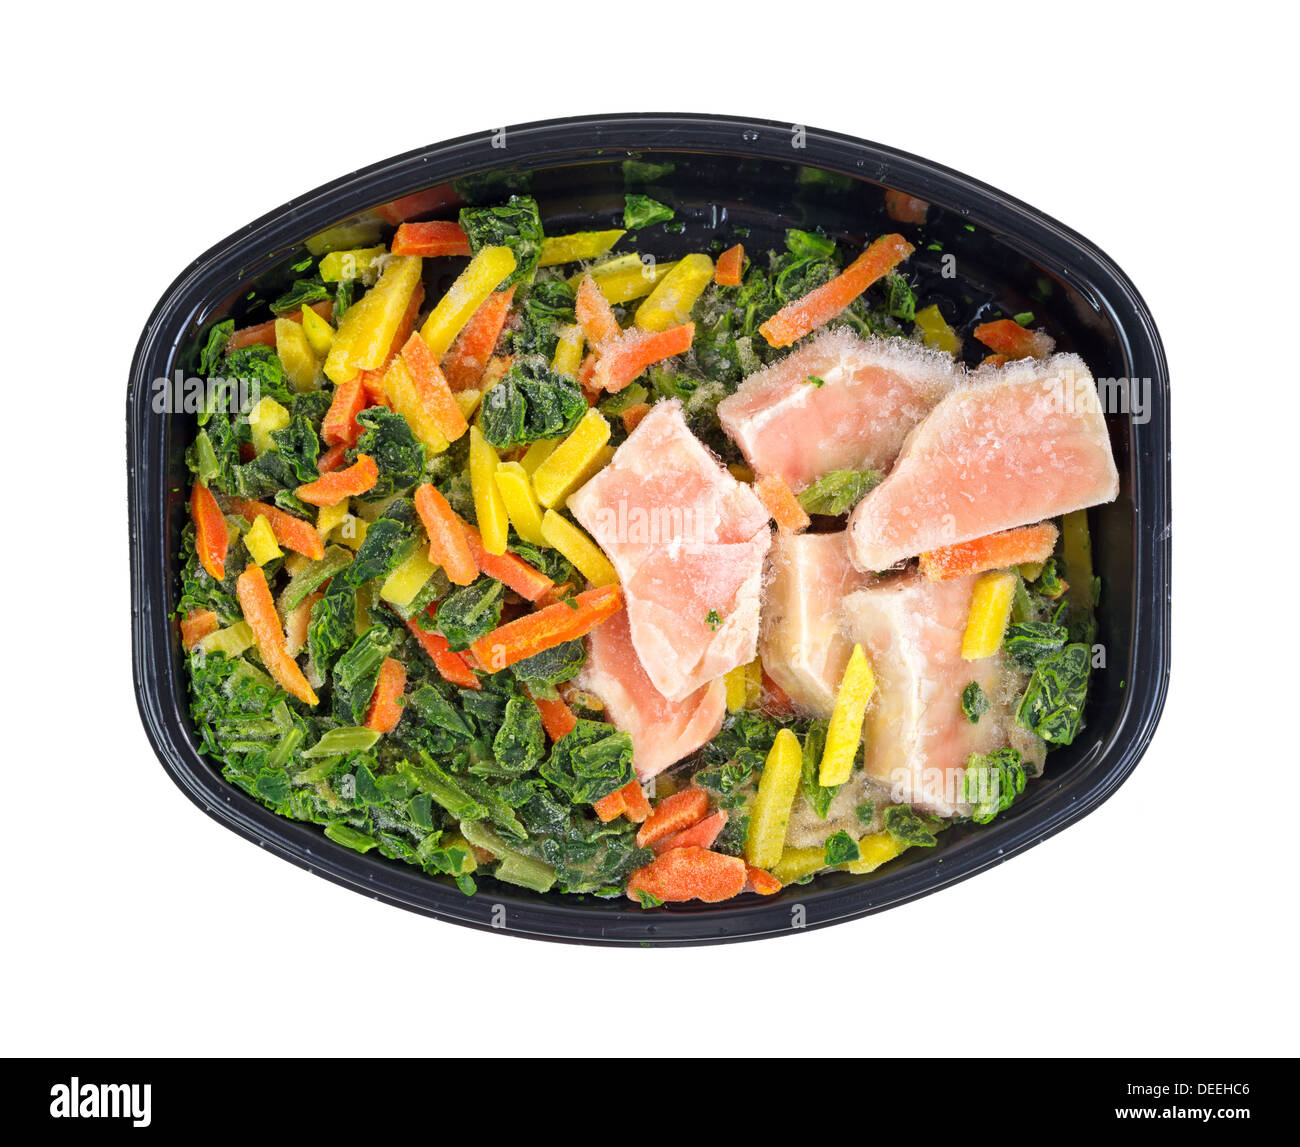 top-view-of-a-frozen-tv-dinner-of-salmon-spinach-carrots-and-pasta-DEEHC6.jpg